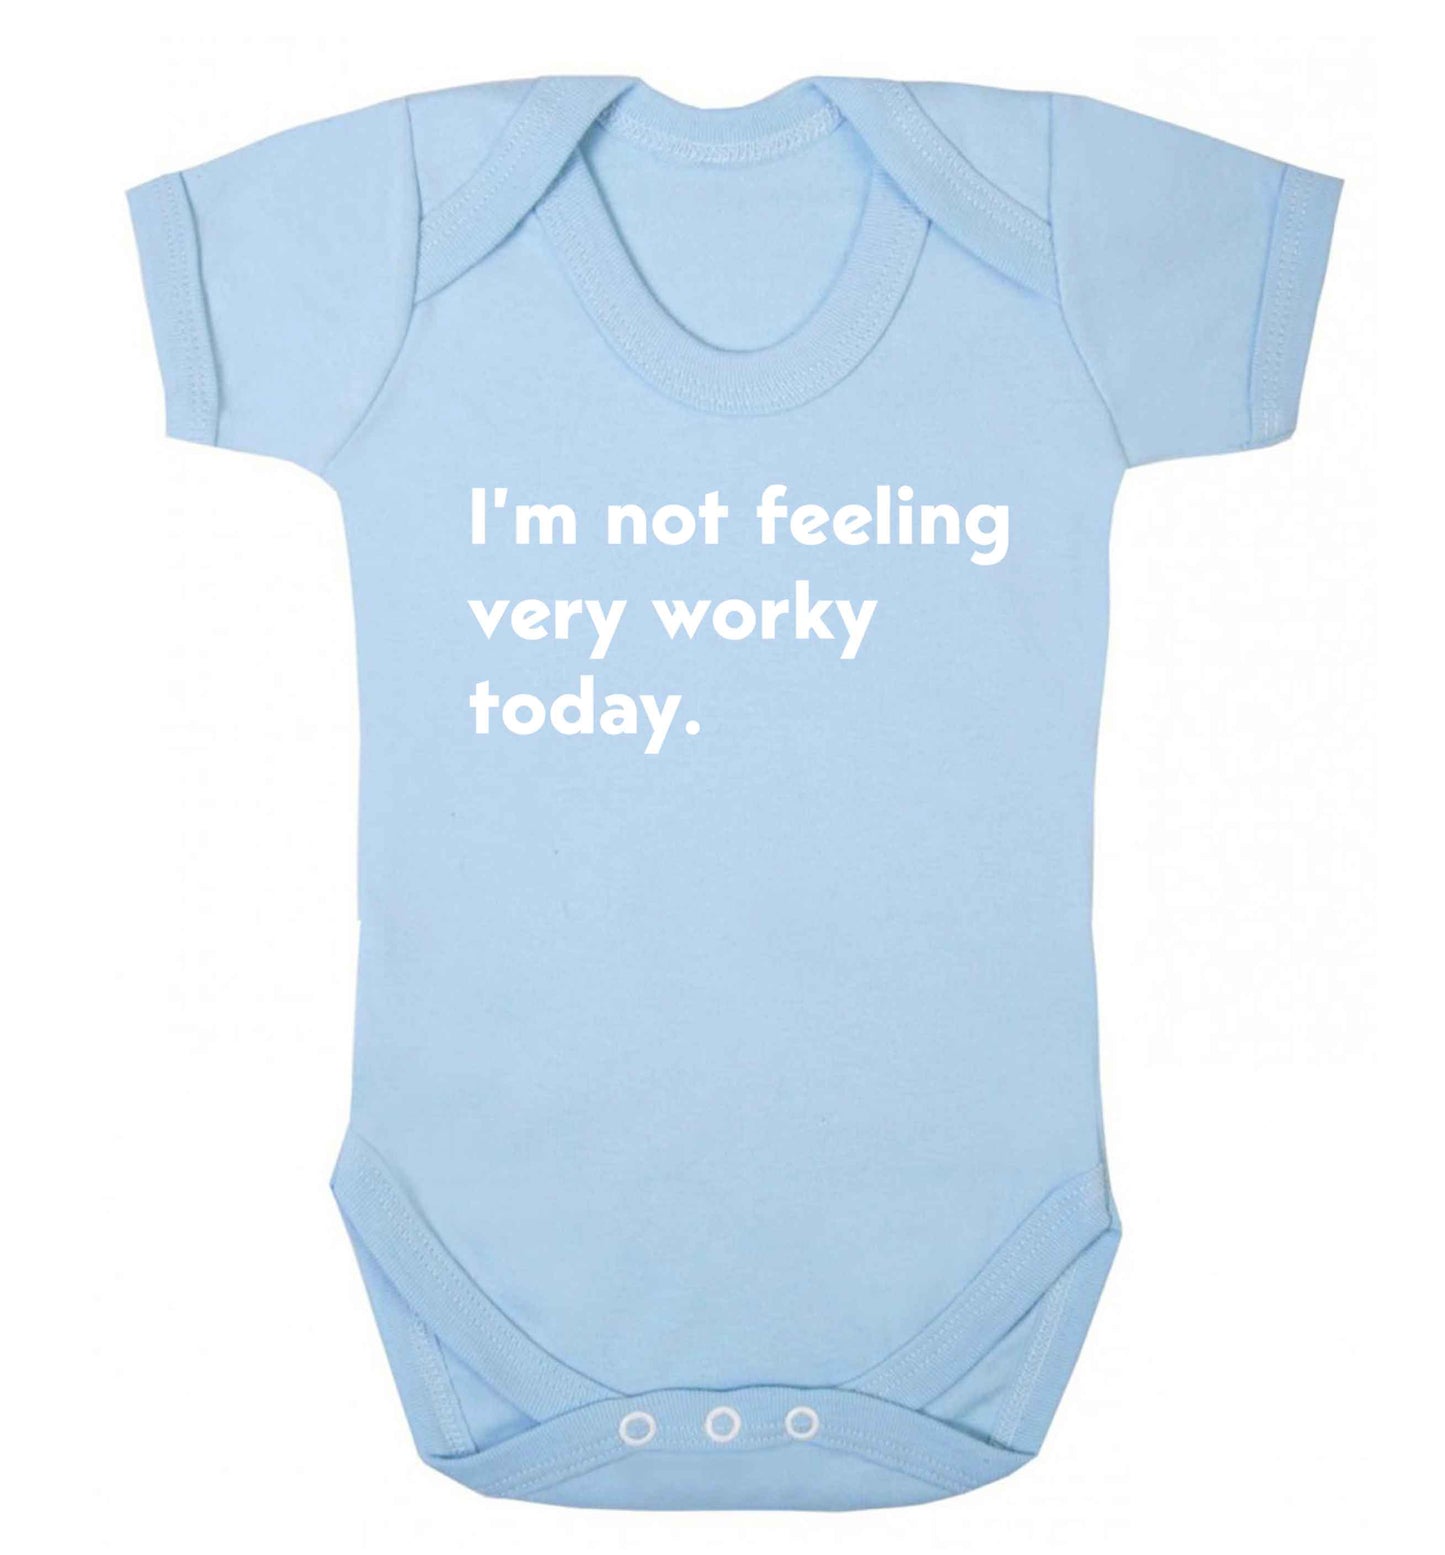 I'm not feeling very worky today Baby Vest pale blue 18-24 months